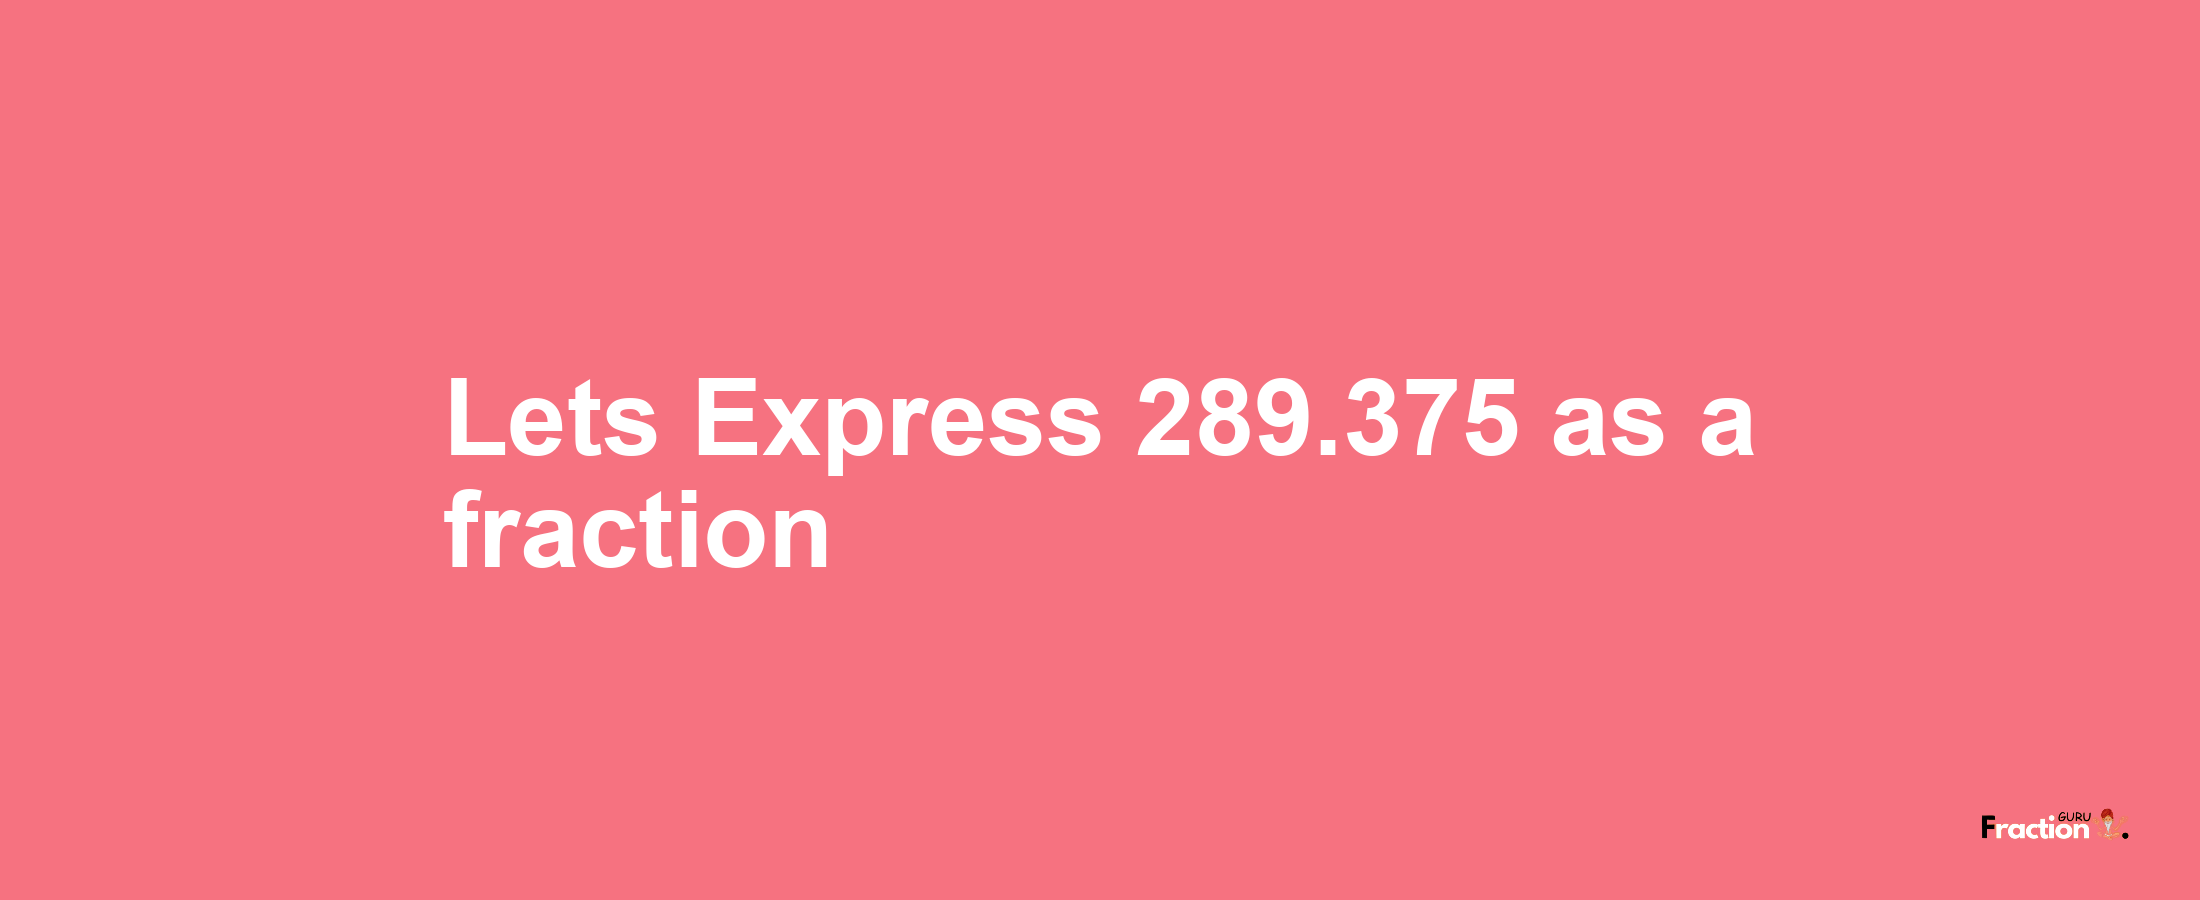 Lets Express 289.375 as afraction